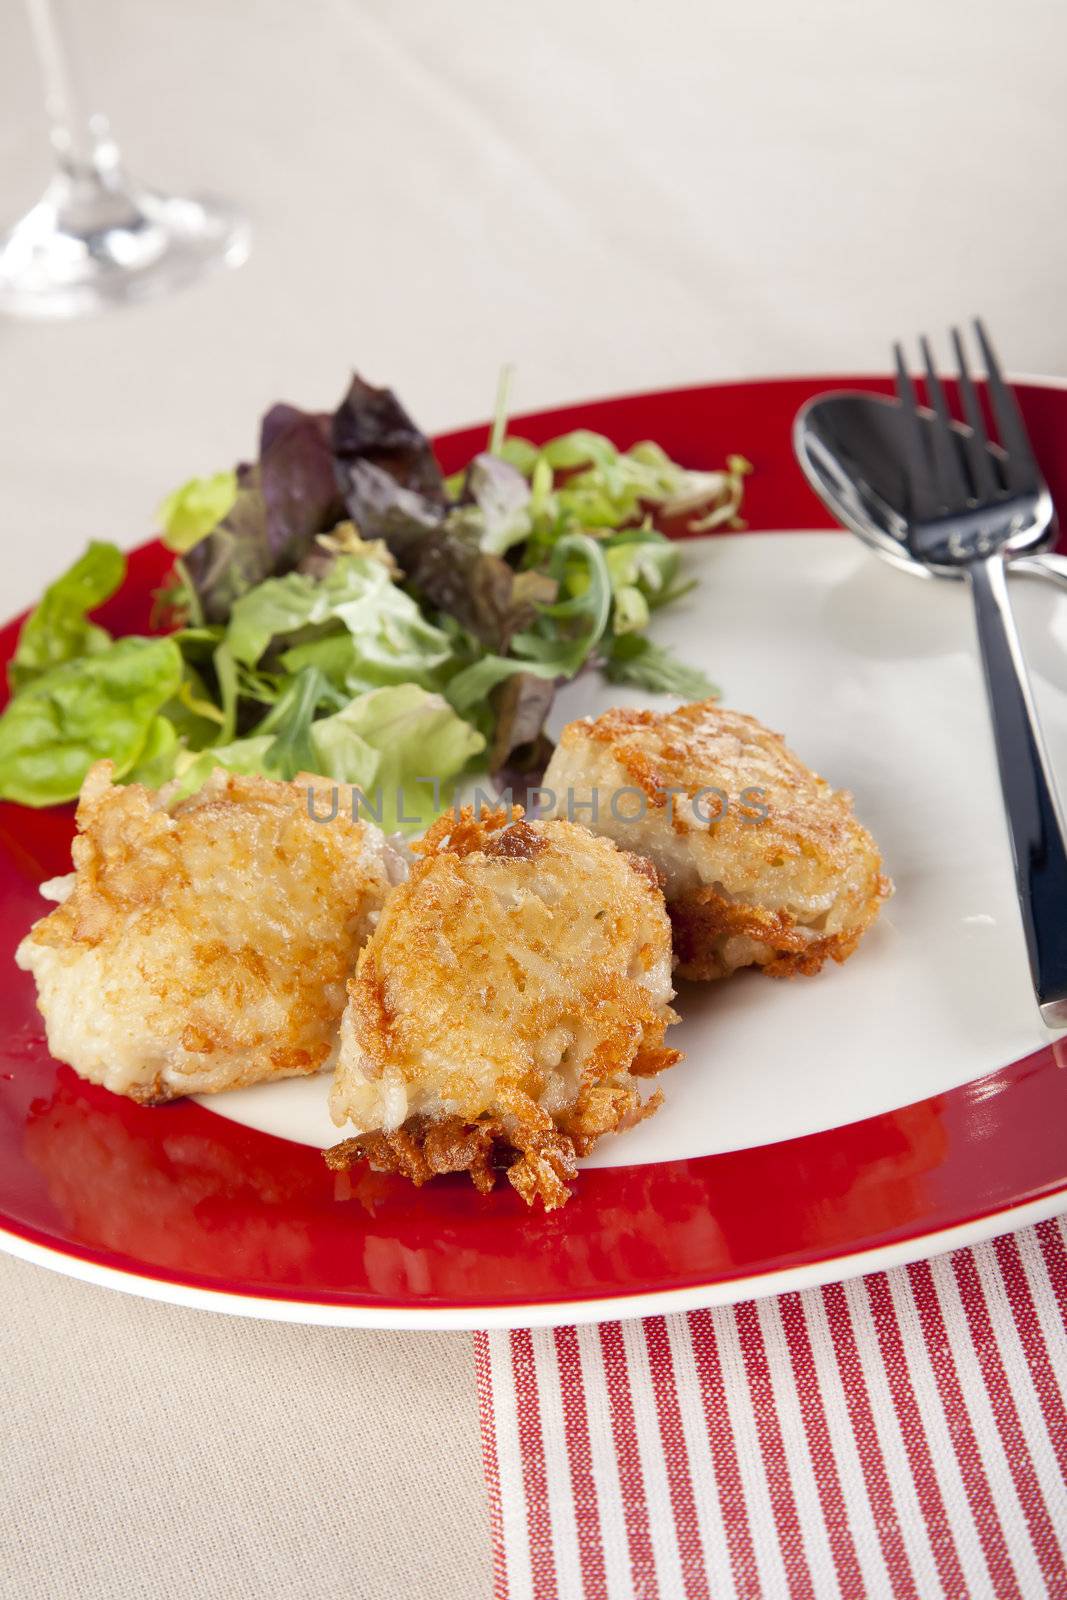 Risotto balls with a side salad.